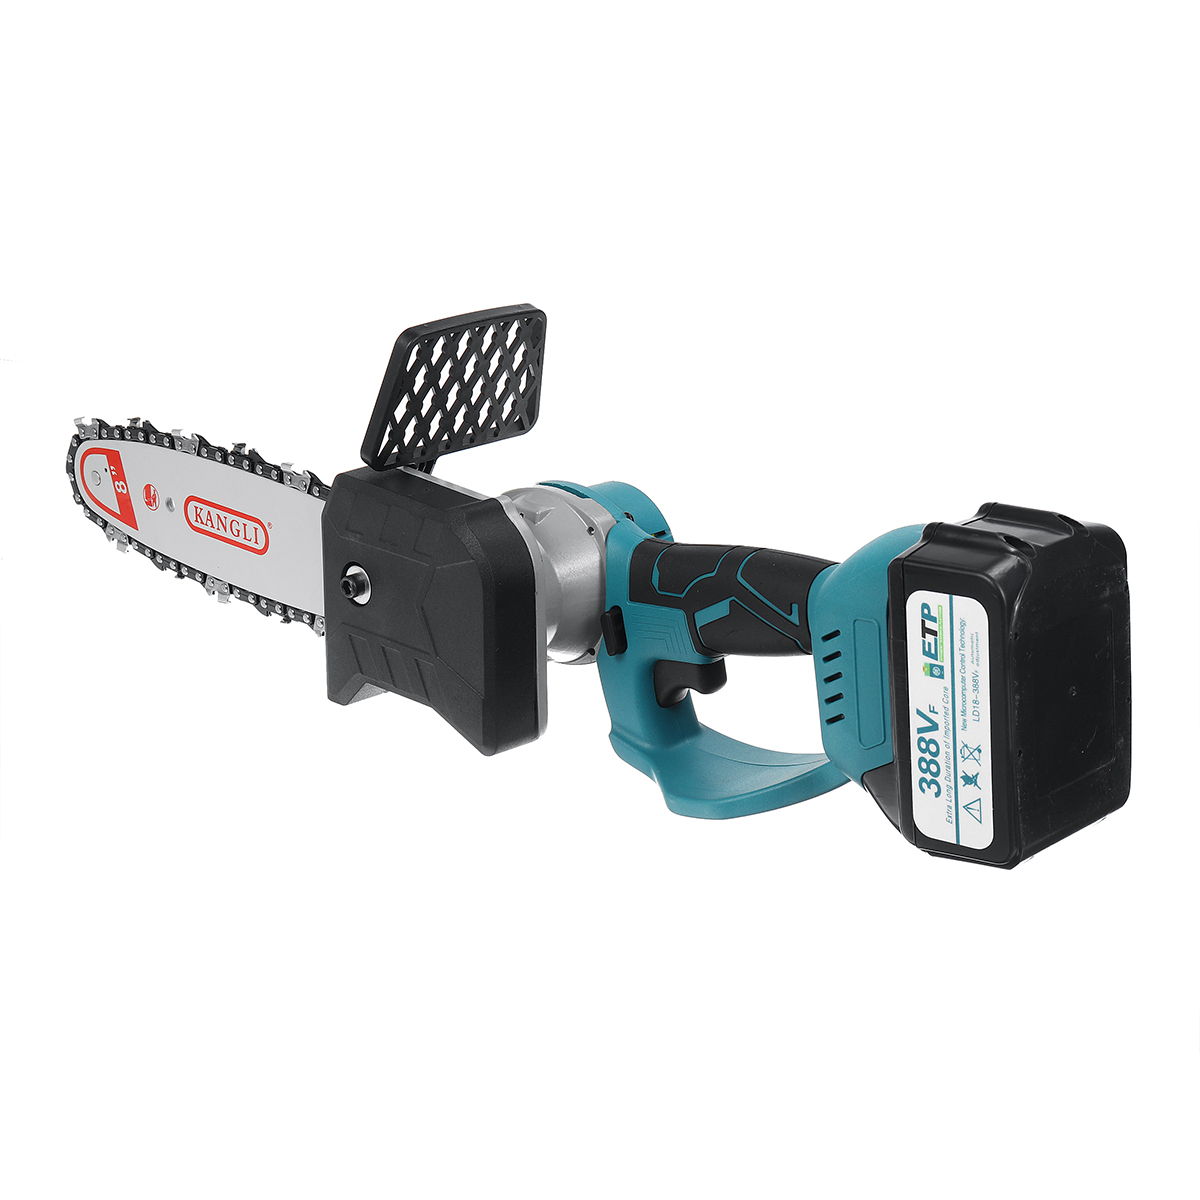 1500W-8inch-Cordless-Electric-Chain-Saw-Brushless-Motor-Power-Tools-Rechargeable-Lithium-Battery-1805588-10